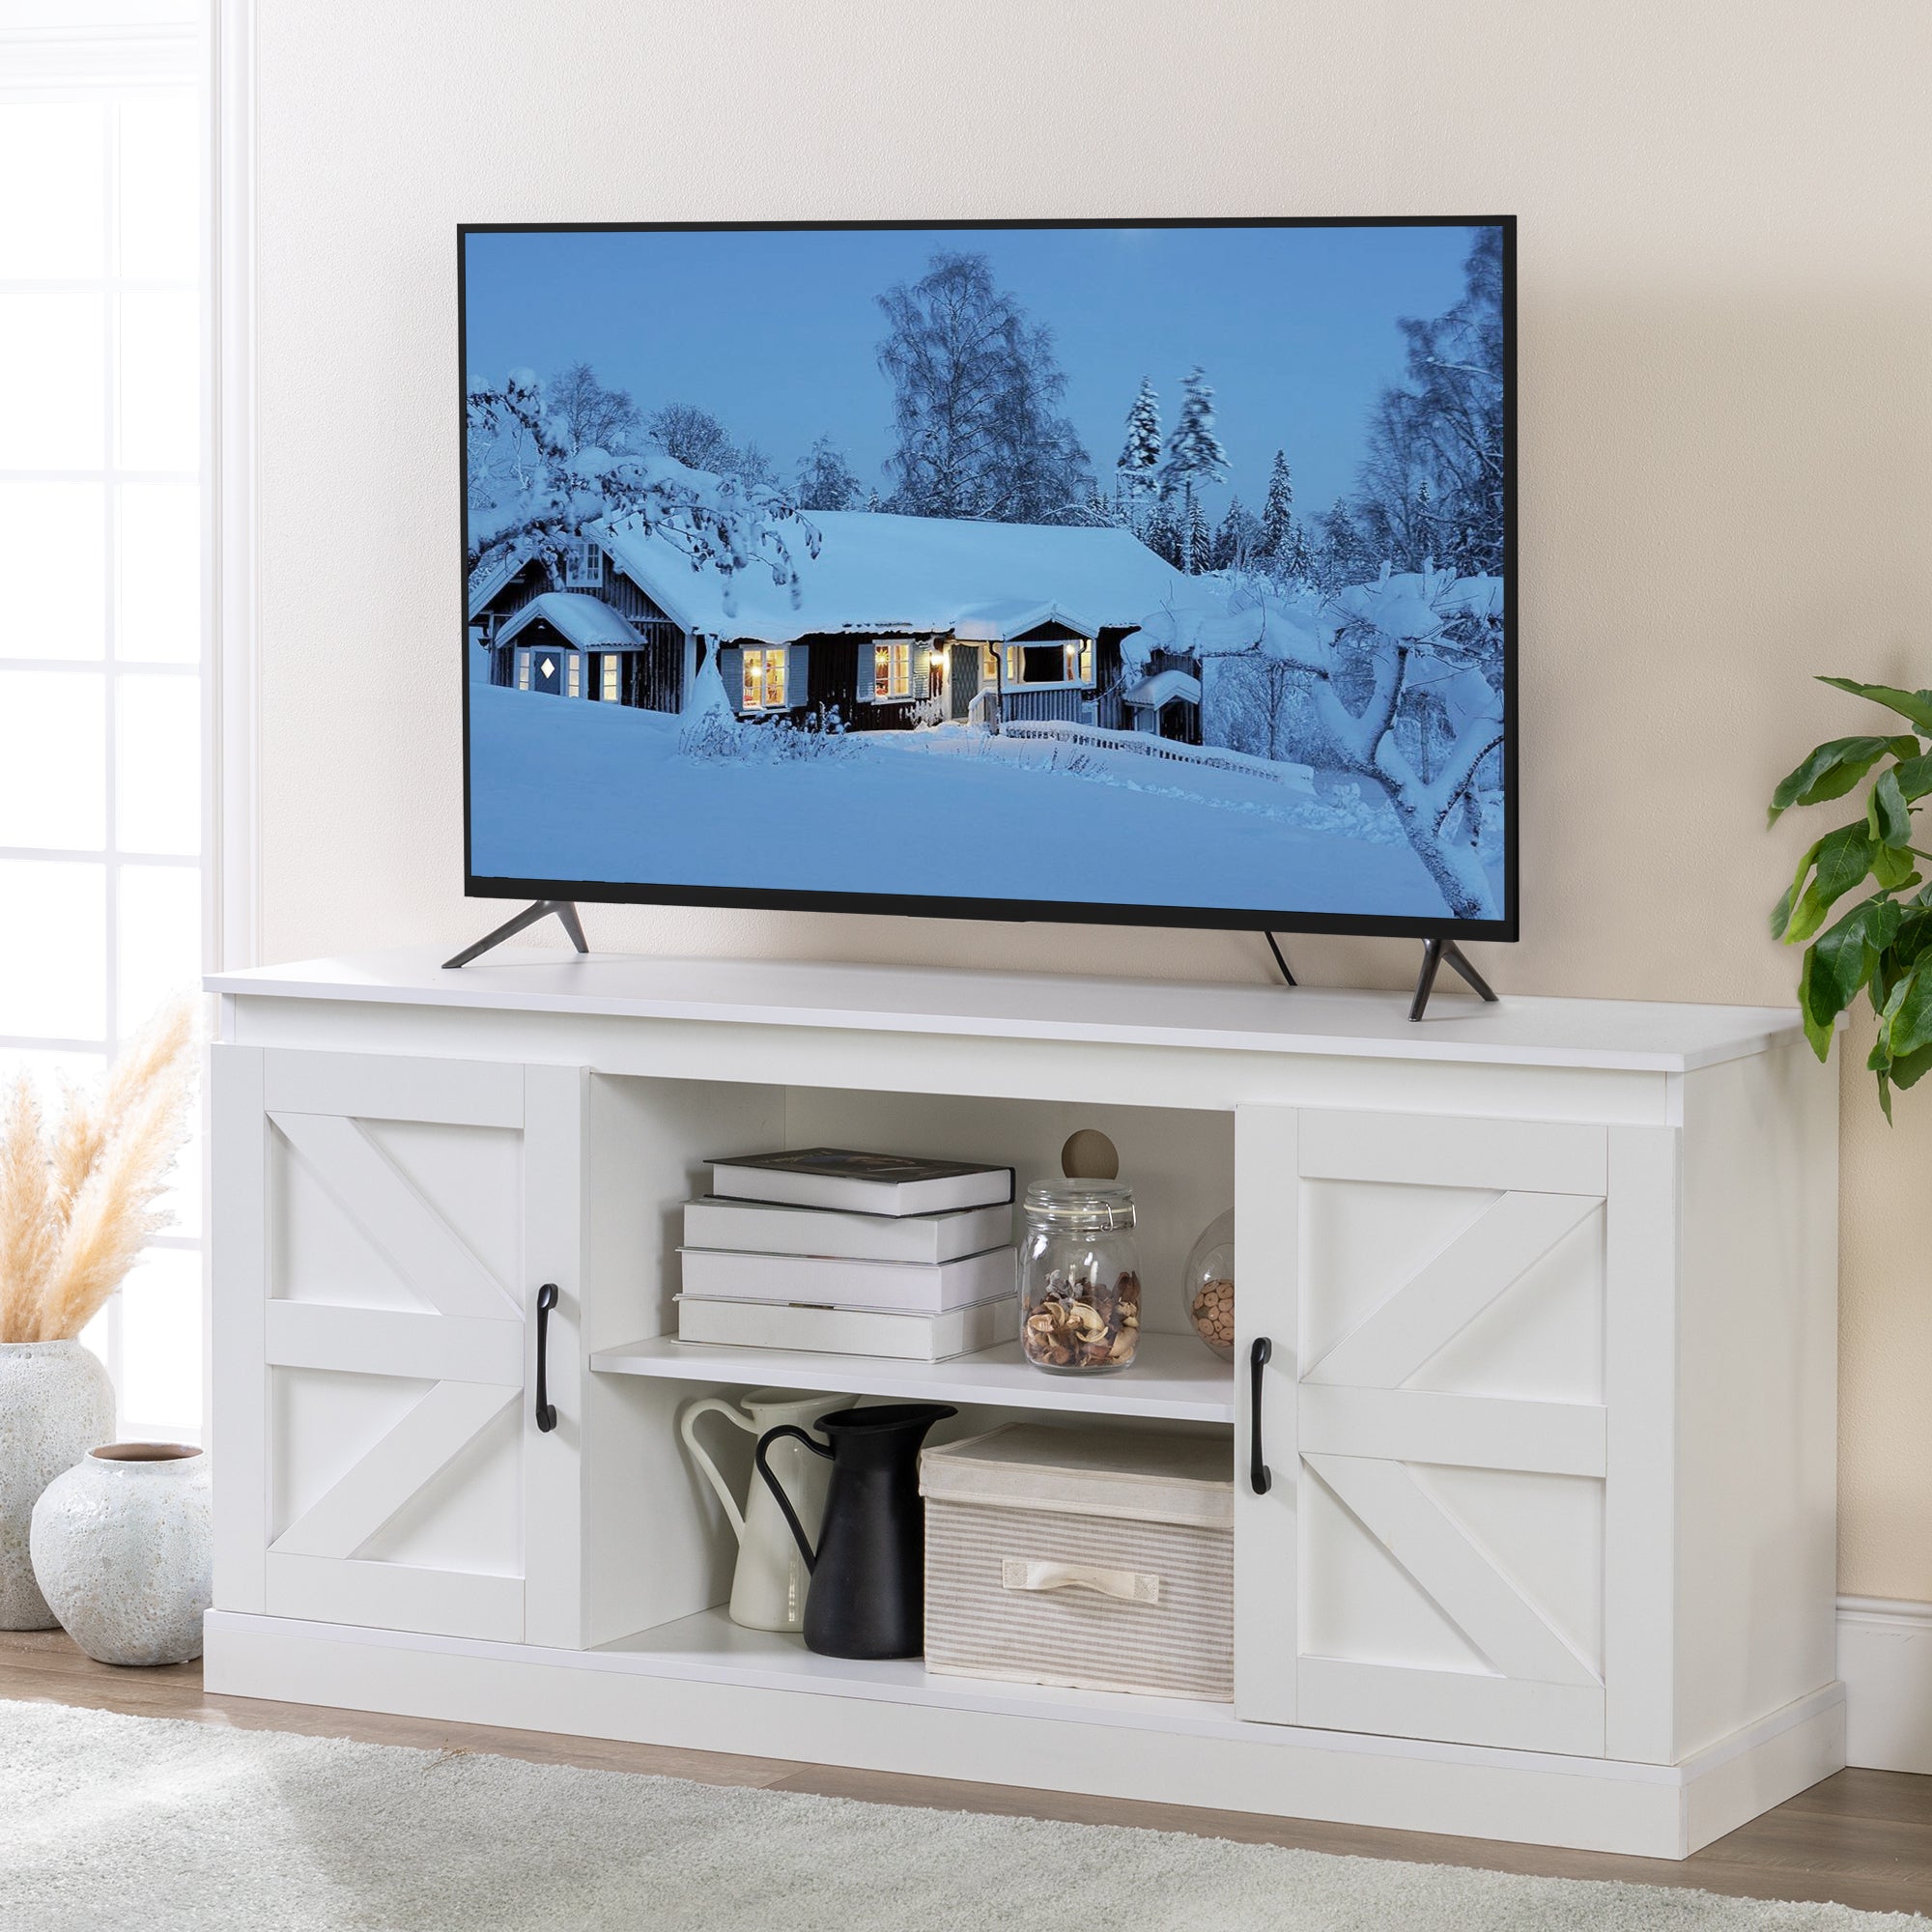 Wade TV Stand for TVs up to 65”